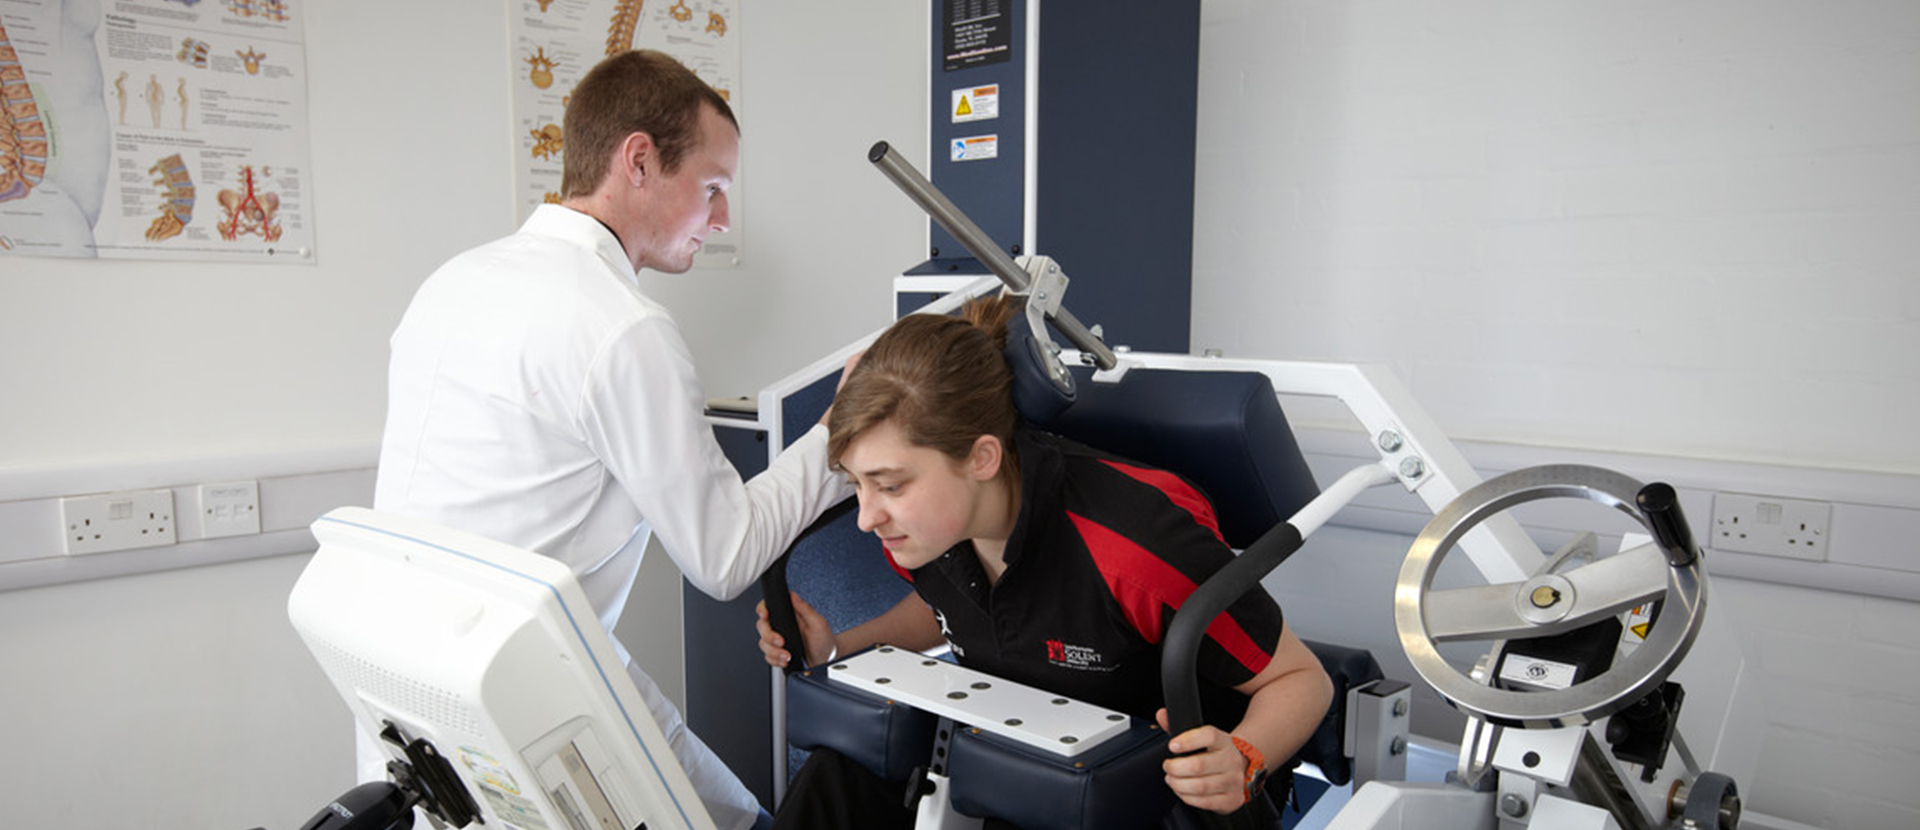 Dr James Steele with a student in the physiology lab